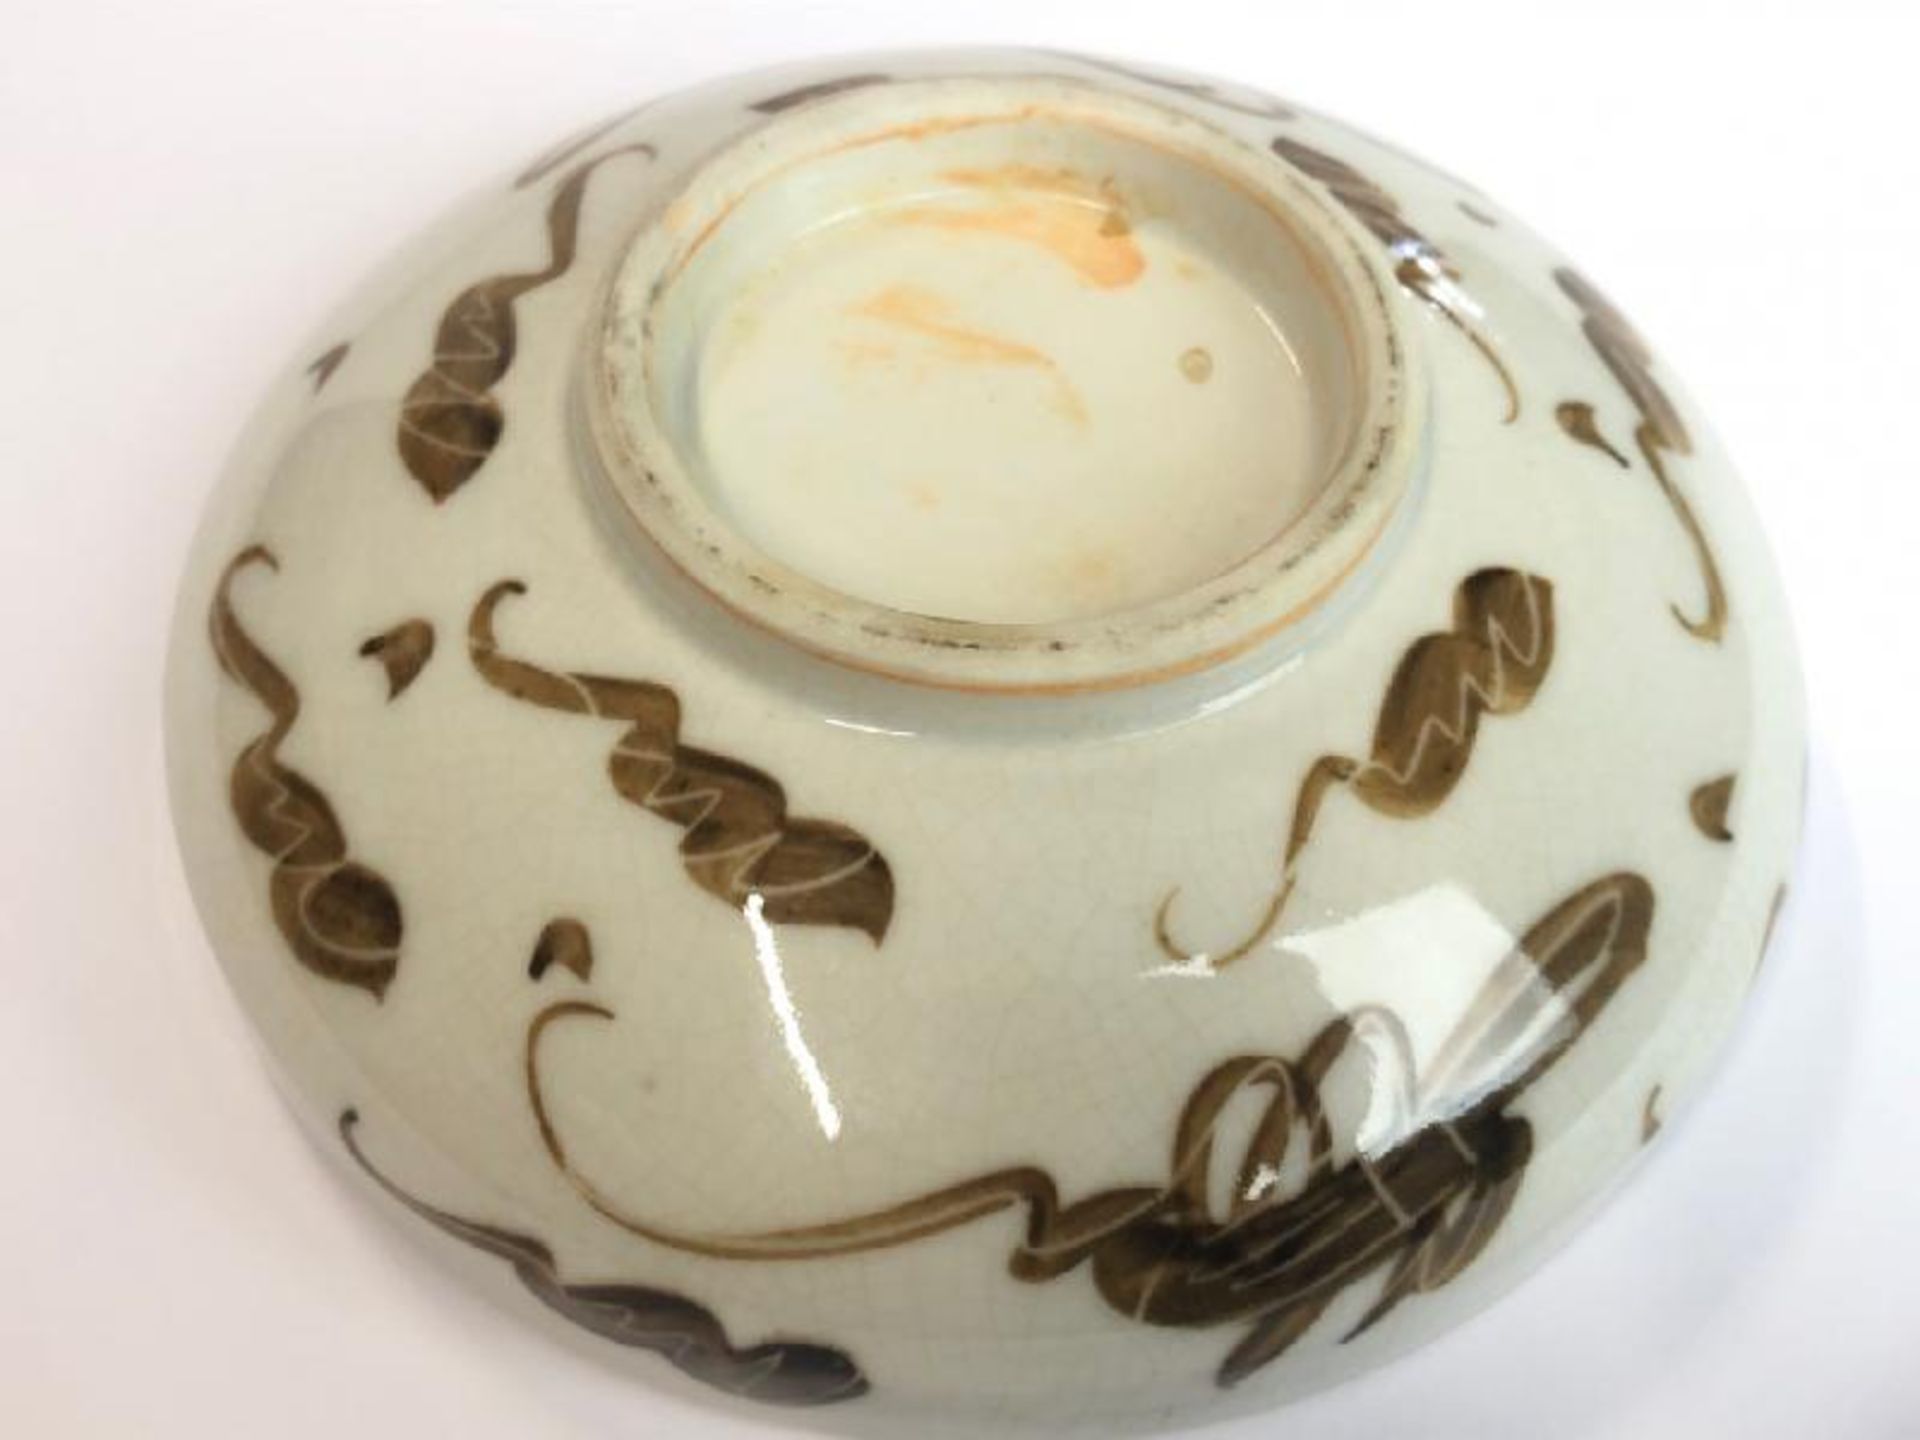 A vintage chinese crackle ware ginger jar with lid, 14cm high with a hand painted crackle ware bowl, - Image 8 of 8